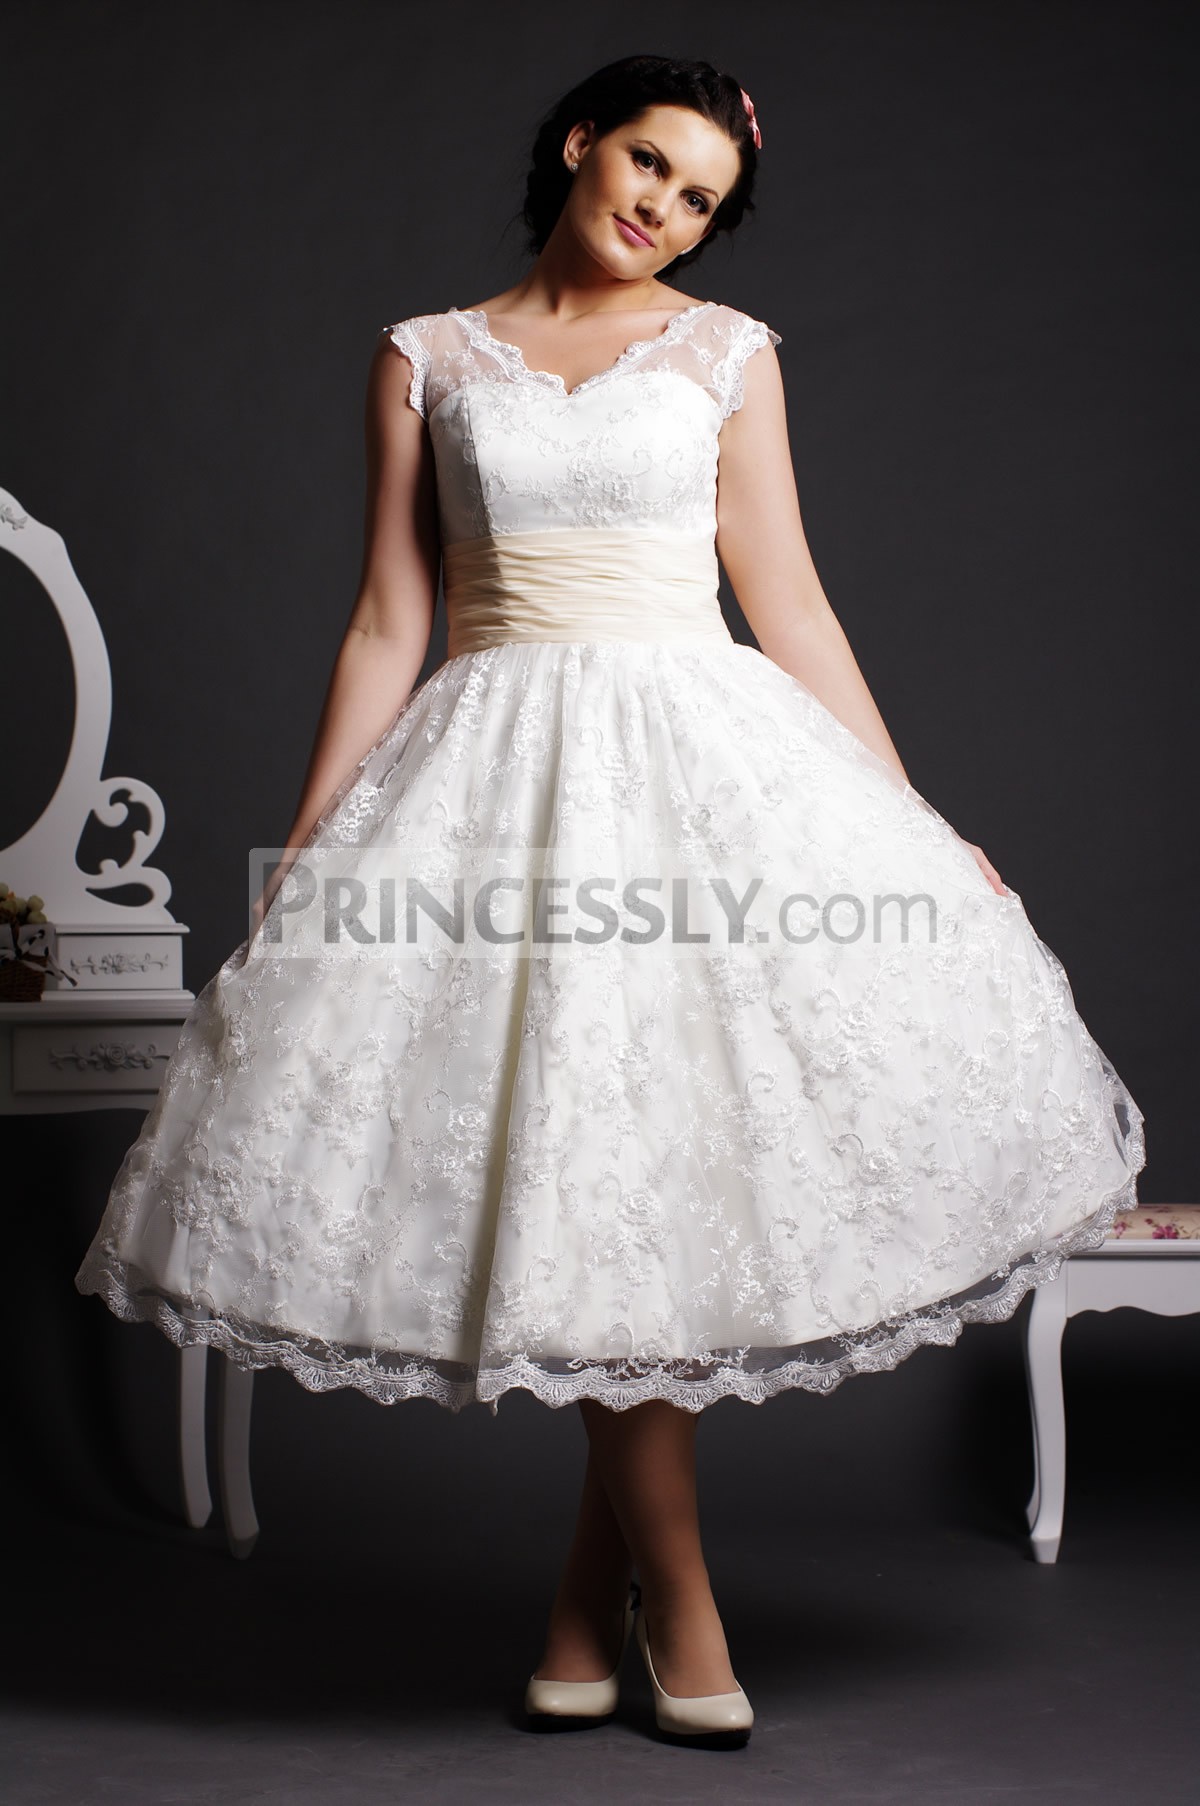 Ball Gown V-neck Sheer Shoulders Ruched Waist Layered Tea Length Lace Wedding Dress